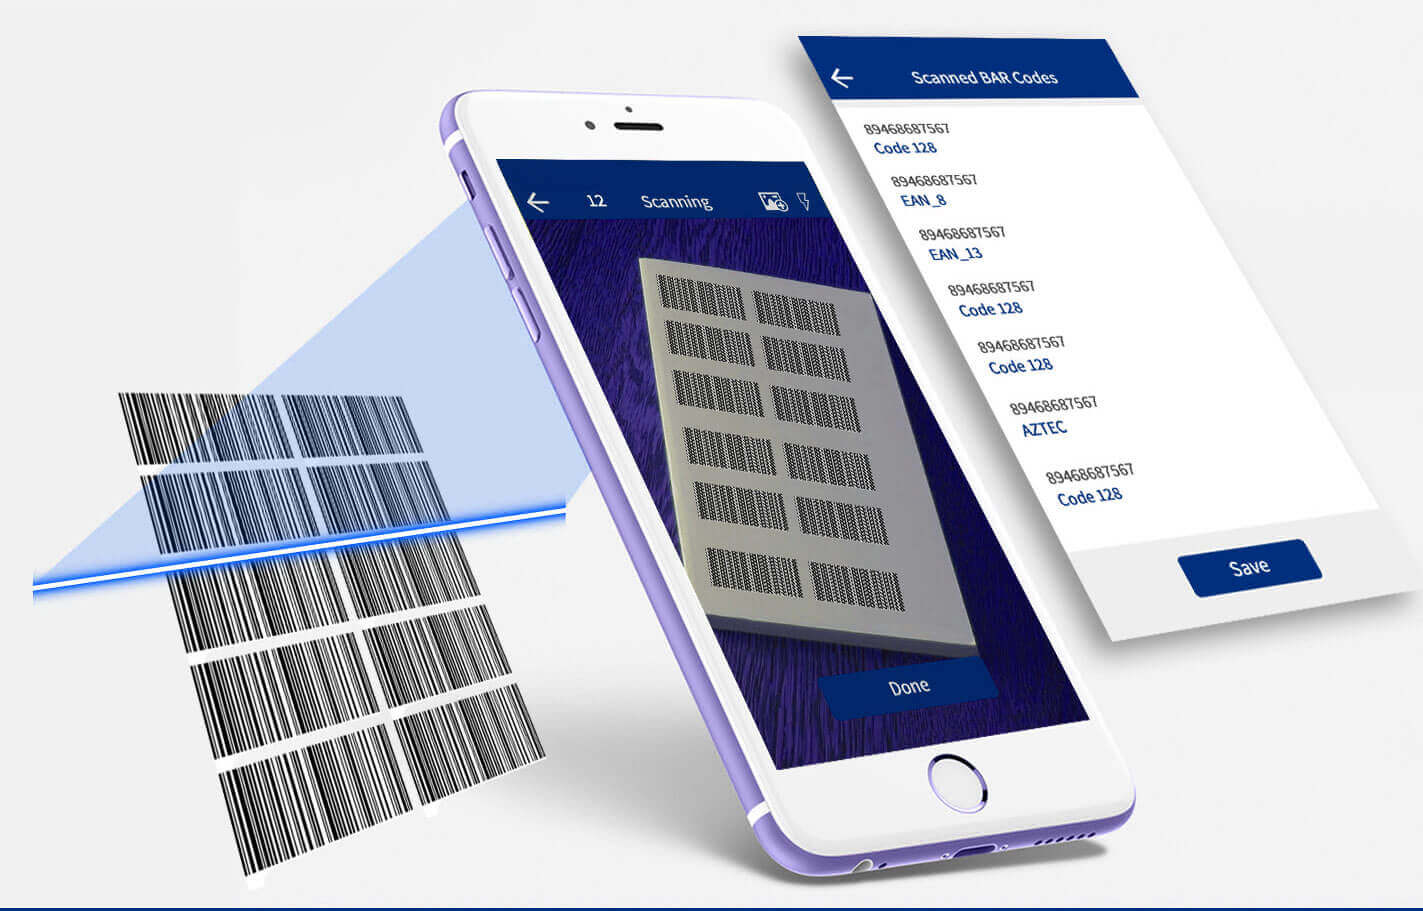 BAR code and QR scanning app design By CaracalEye